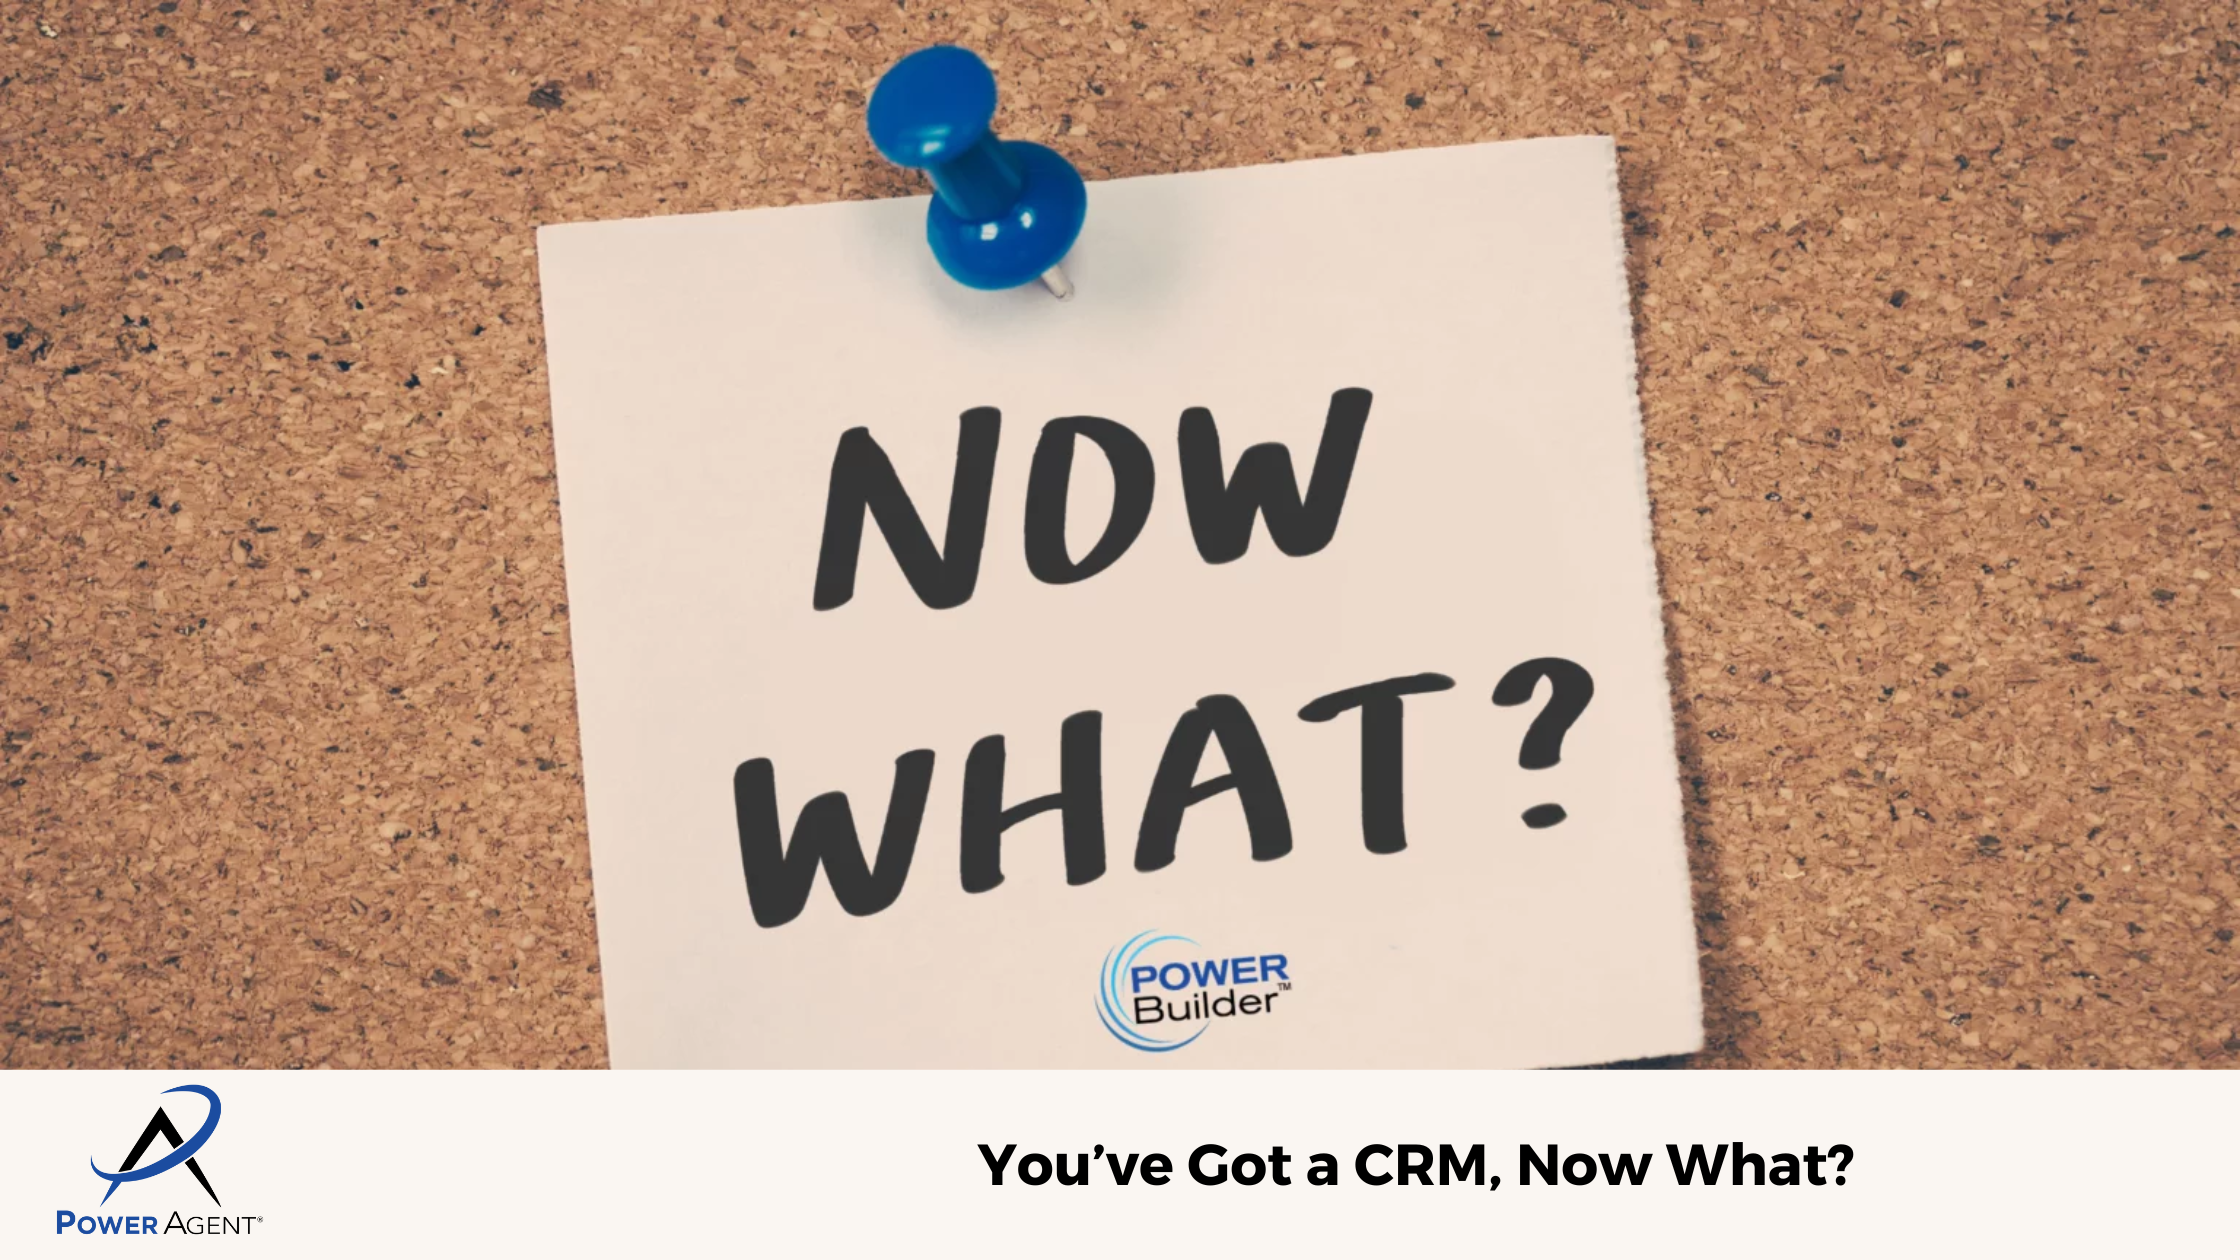 You’ve Got a CRM, Now What?